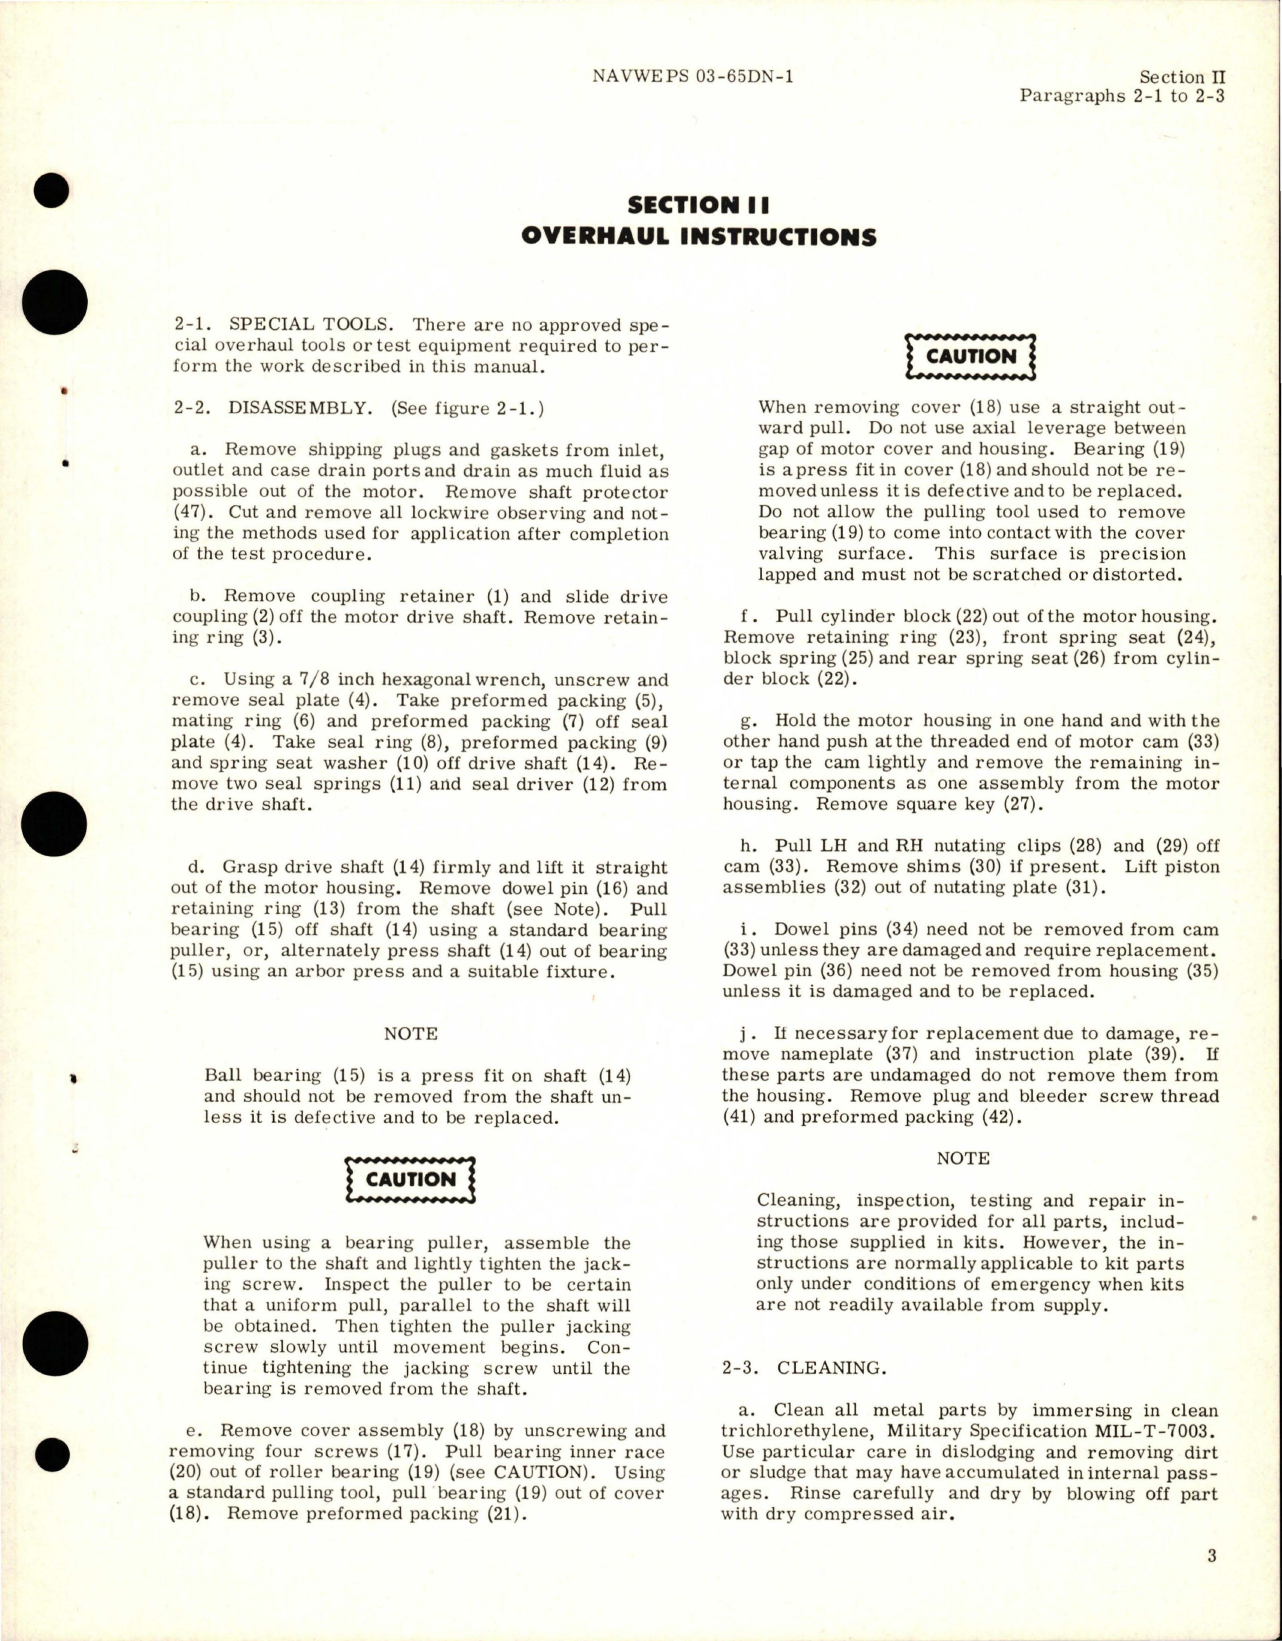 Sample page 7 from AirCorps Library document: Overhaul Instructions for Stratopower Hydraulic Motor - Model 53F00501 